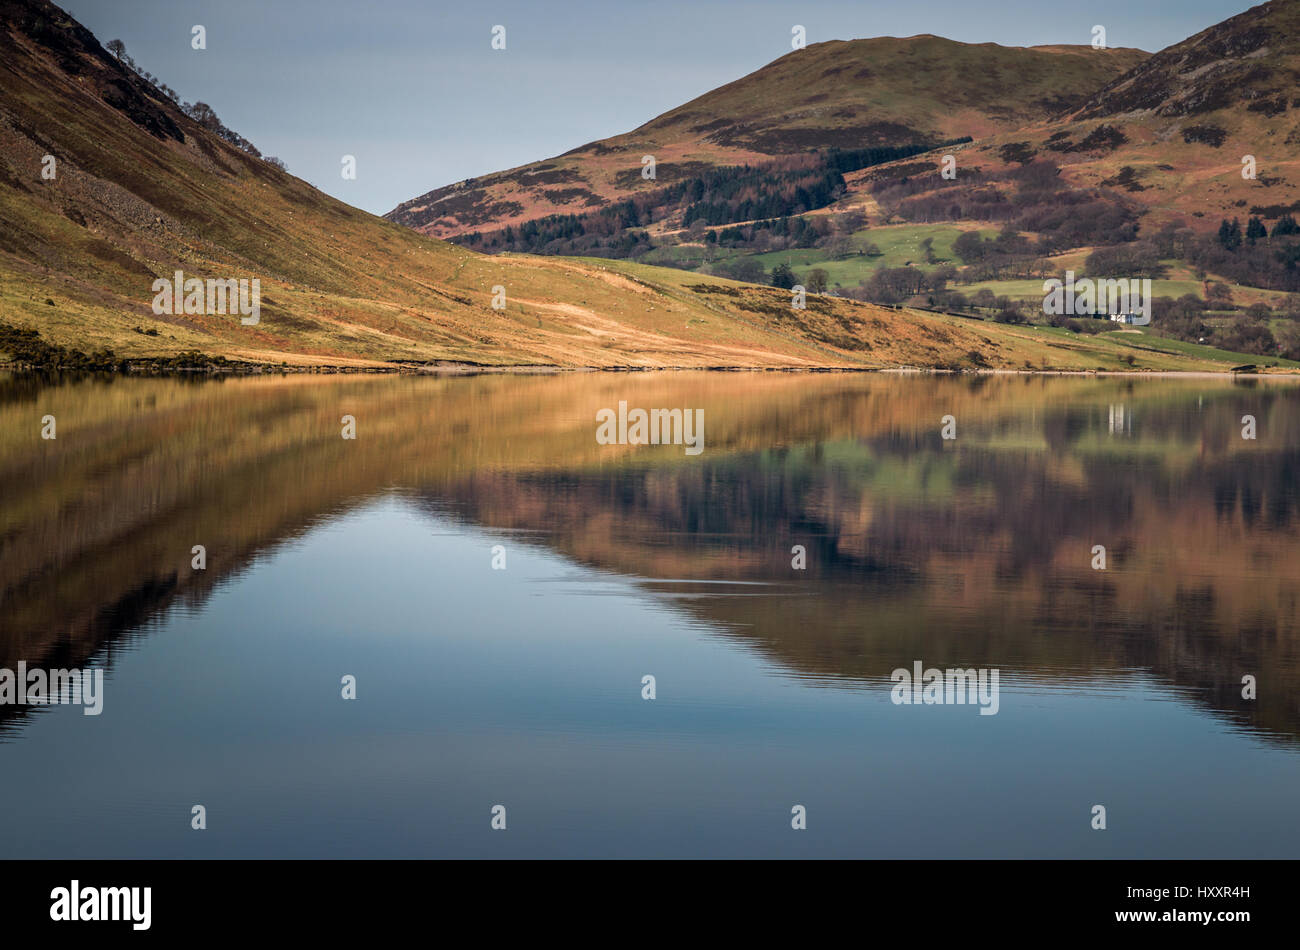 Reflections in the clear, calm lake at Crummock Water in Cumbria, Englsh Lake District, north west England, UK Stock Photo